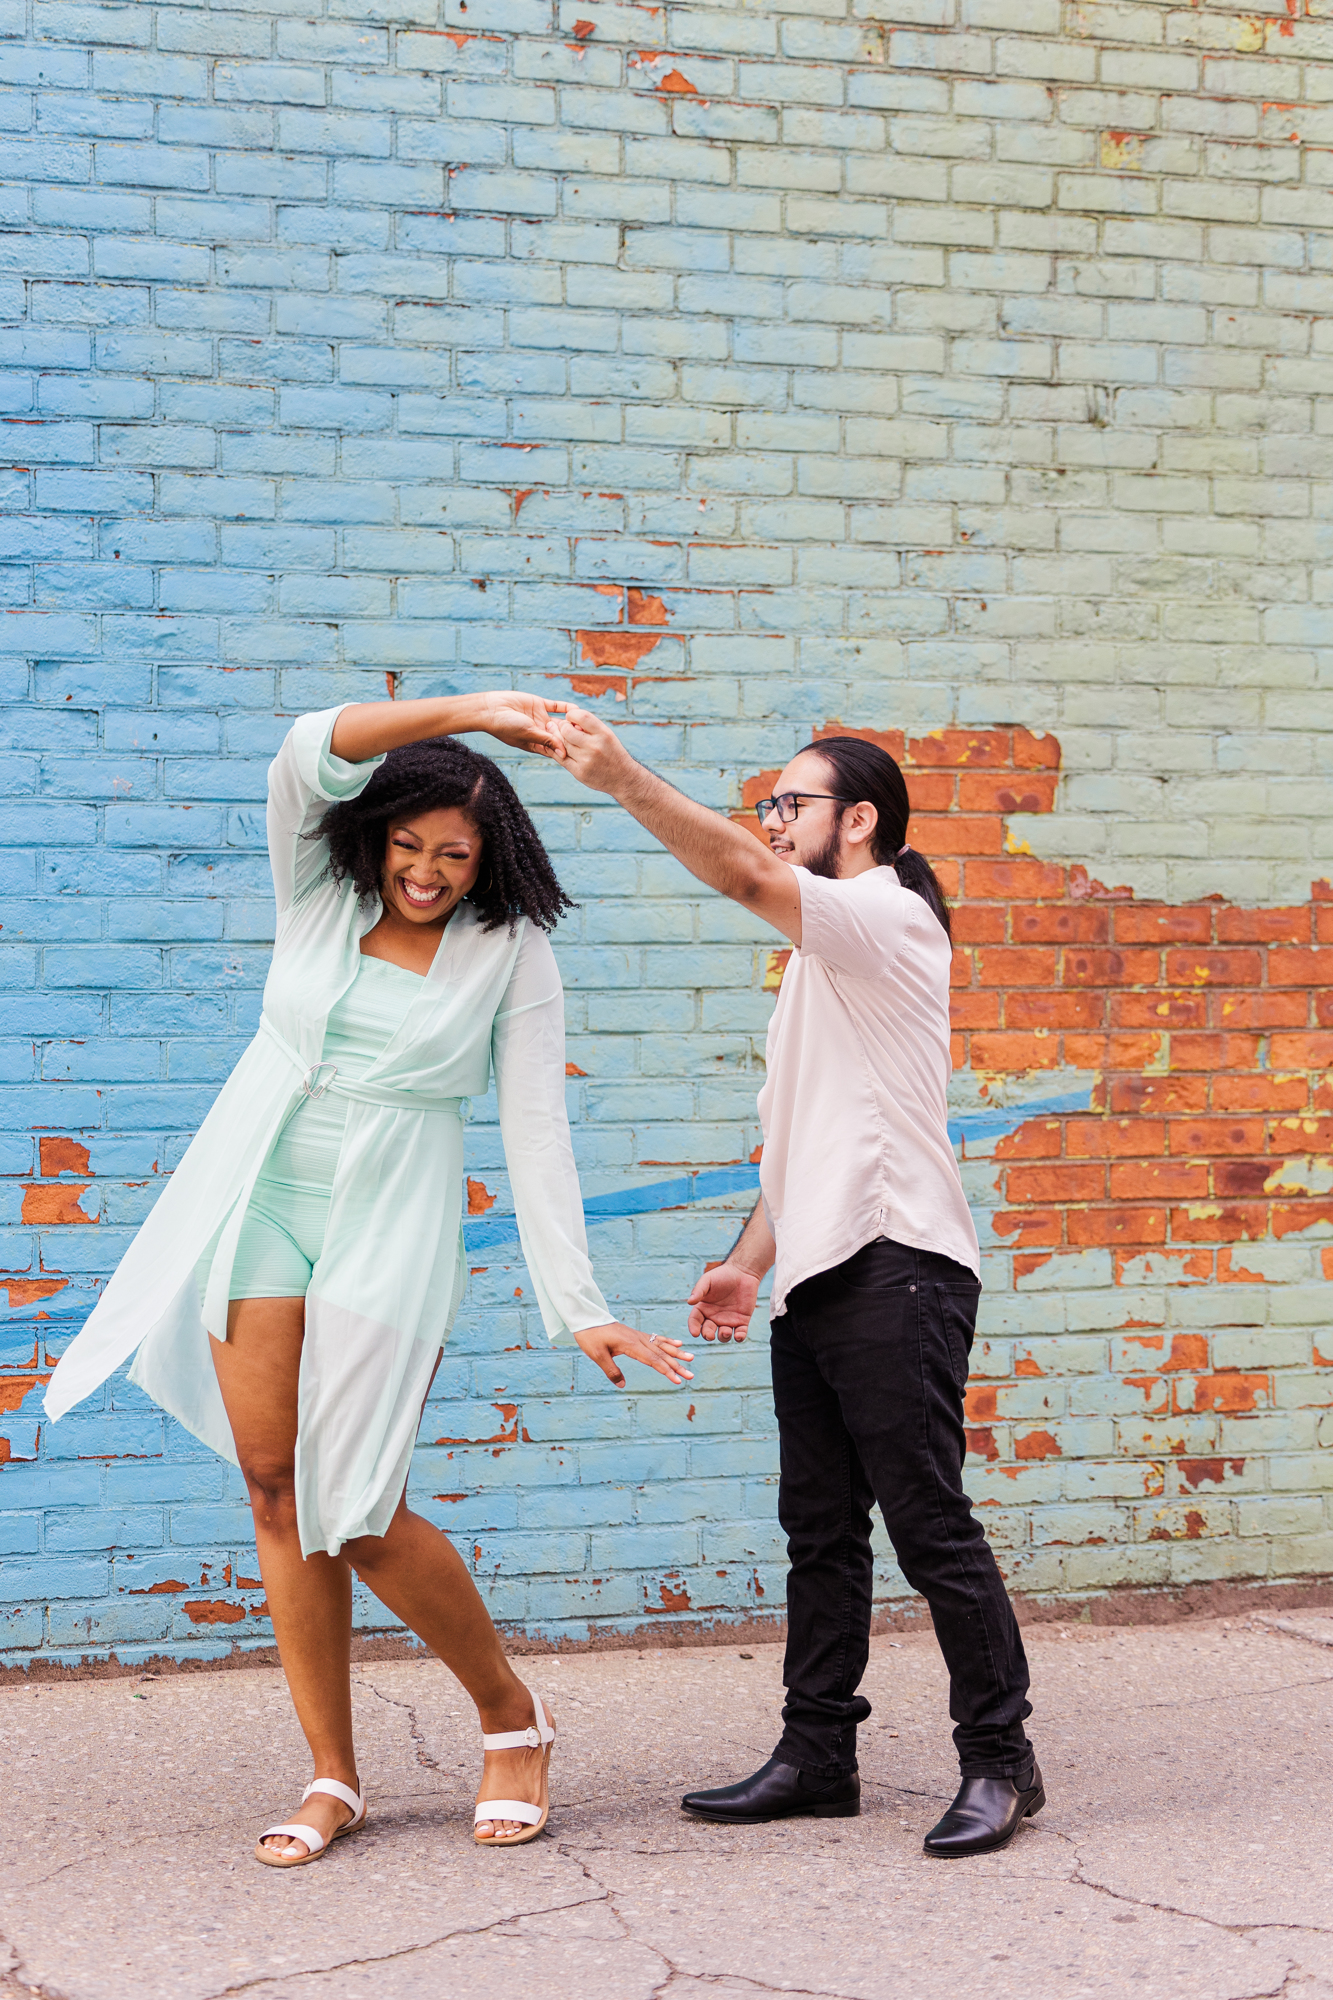 Magical Summer Engagement Photo Shoot in New York